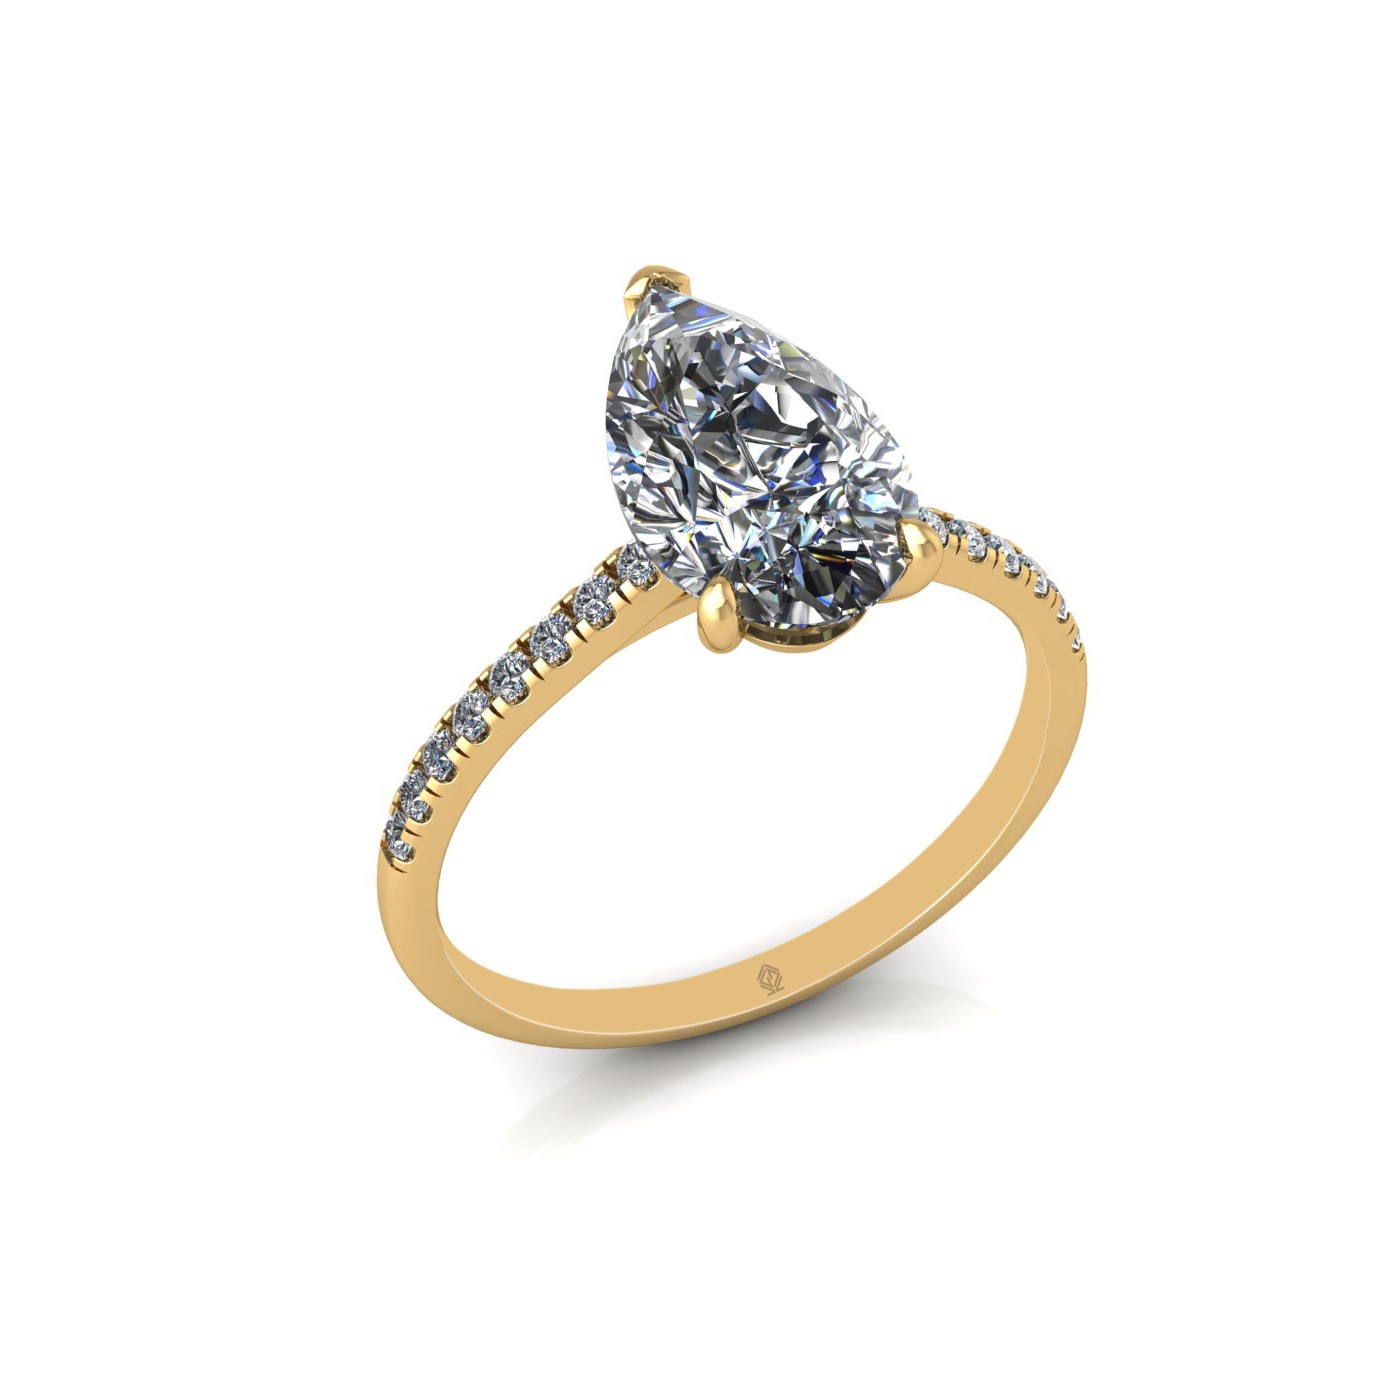 18k yellow gold 2,00 ct 3 prongs pear diamond engagement ring with whisper thin pavÉ set band